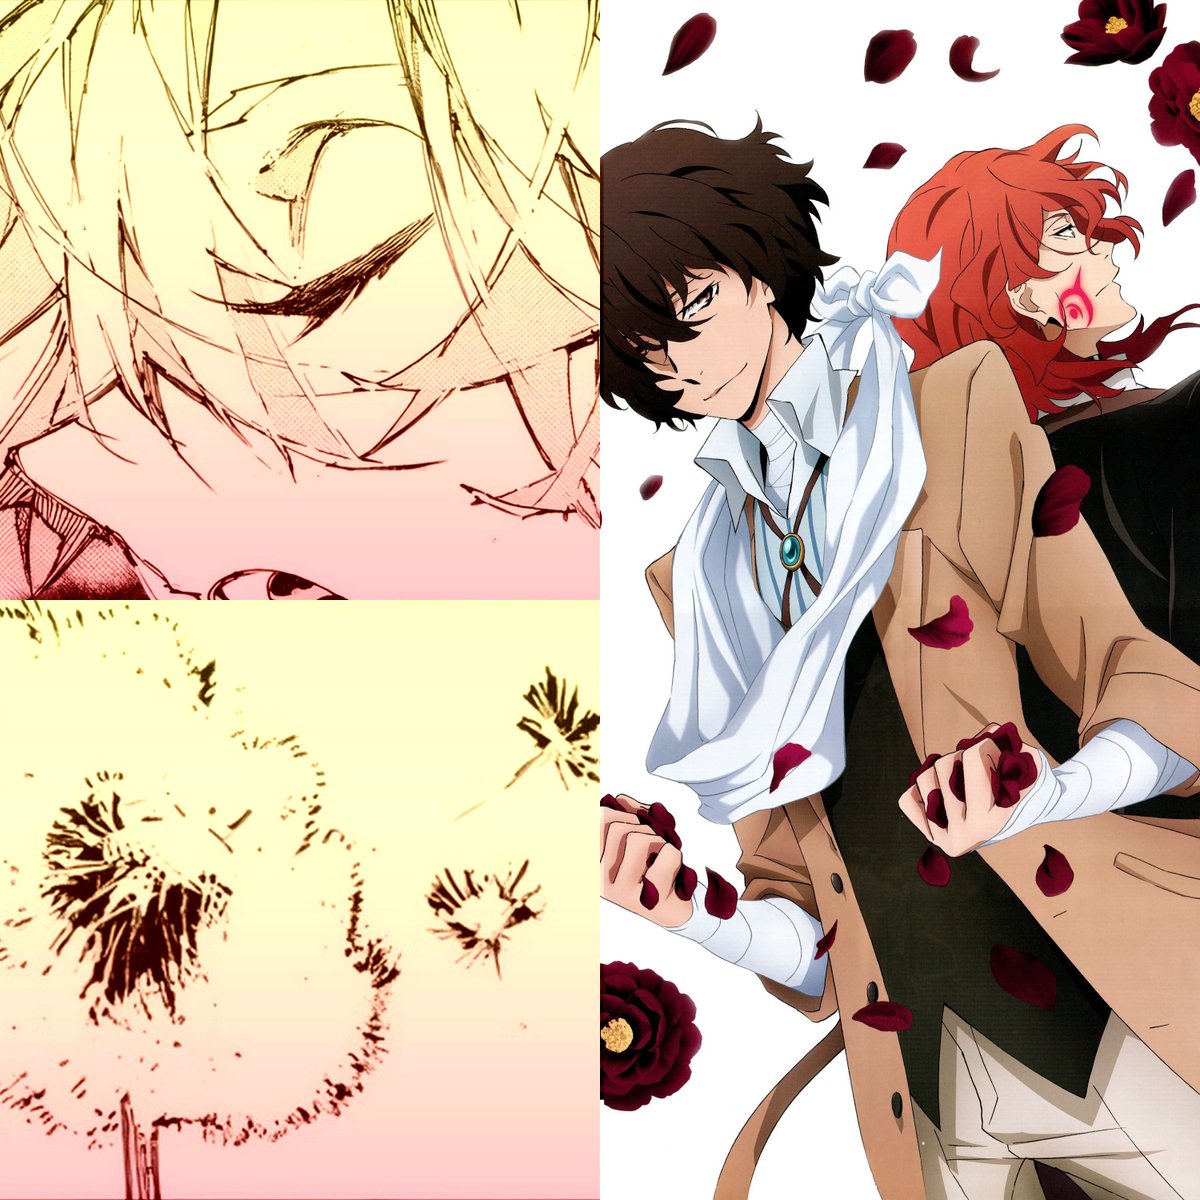 Dandelion and Camelia,symbol of pure healing and love passion,Chuuya being forever this frail fragile flying petal that Dazai will hold protectively in the palm of his hand for eternity 🌹